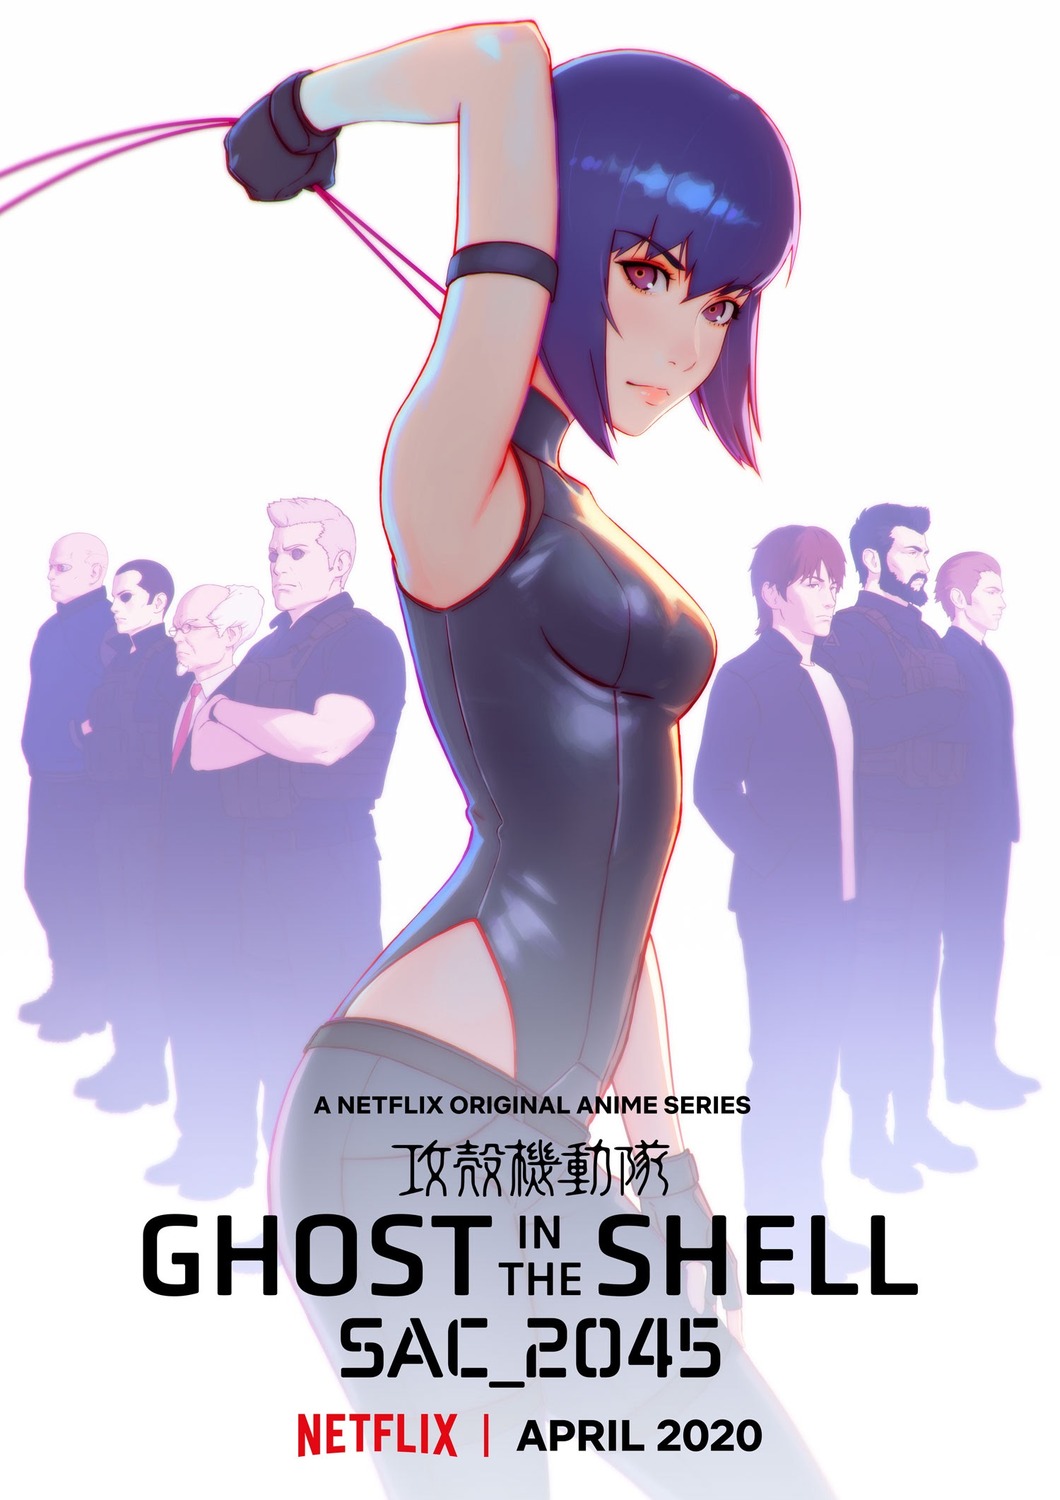 Extra Large TV Poster Image for Ghost in the Shell SAC_2045 (#1 of 5)